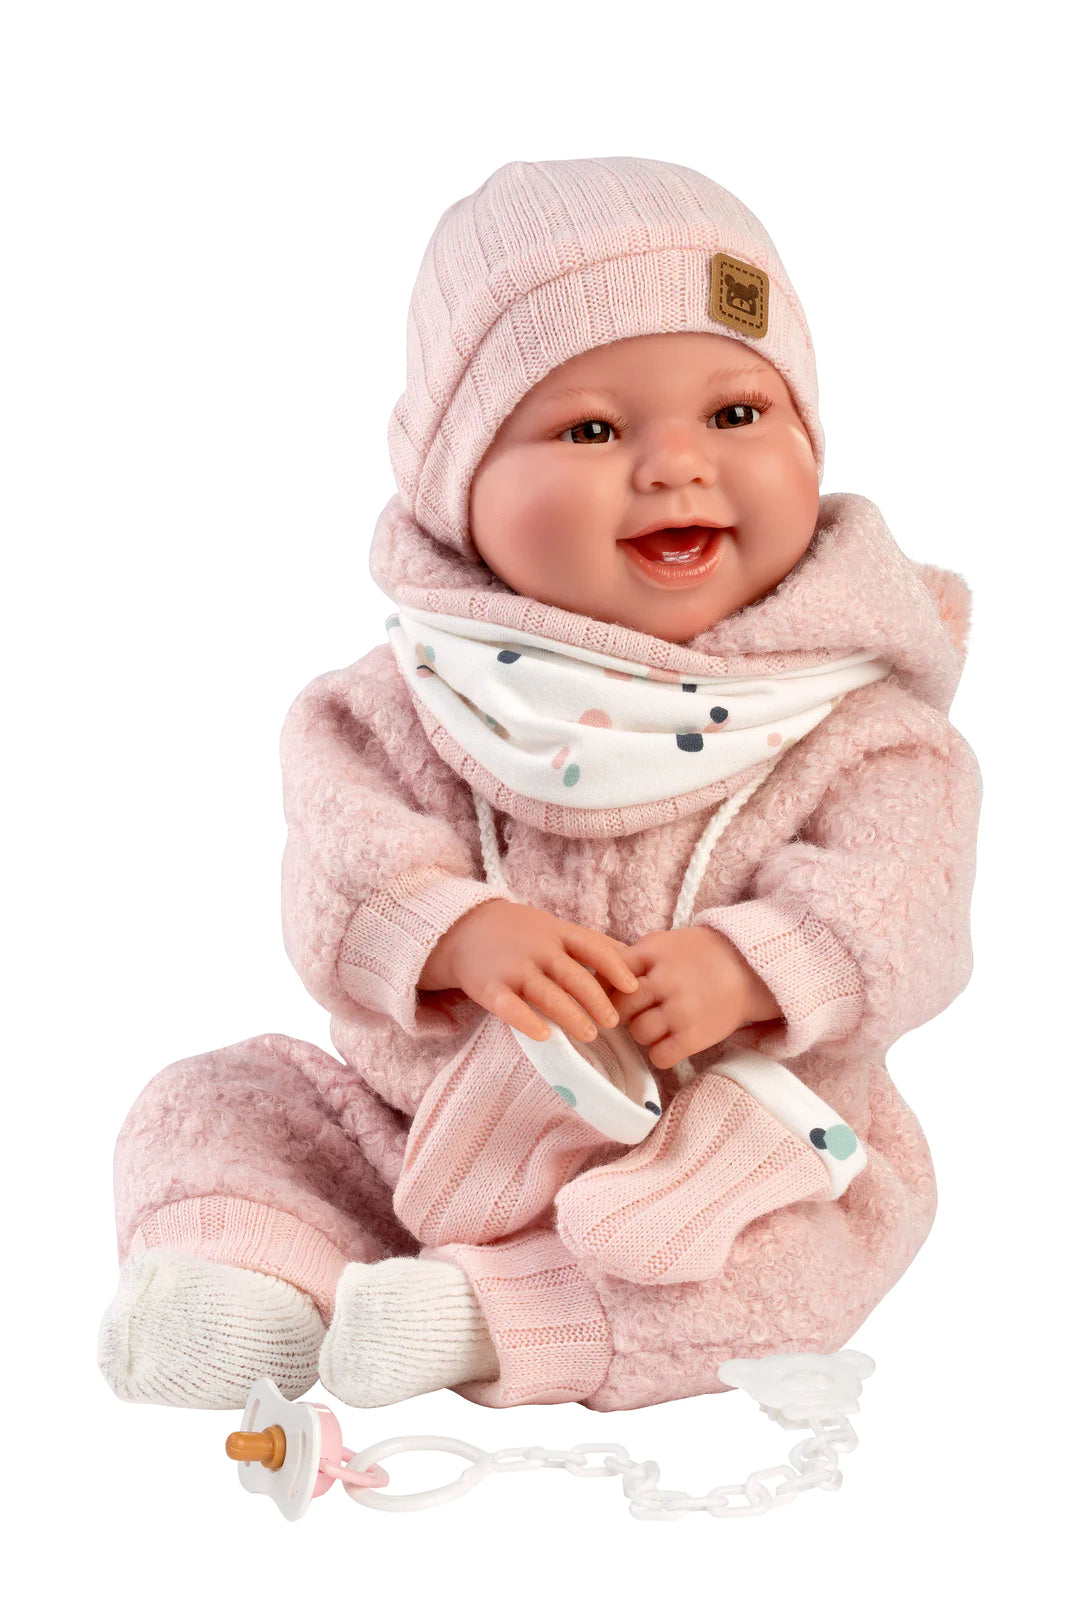 84480 Tala Crying Doll - Pink Suit